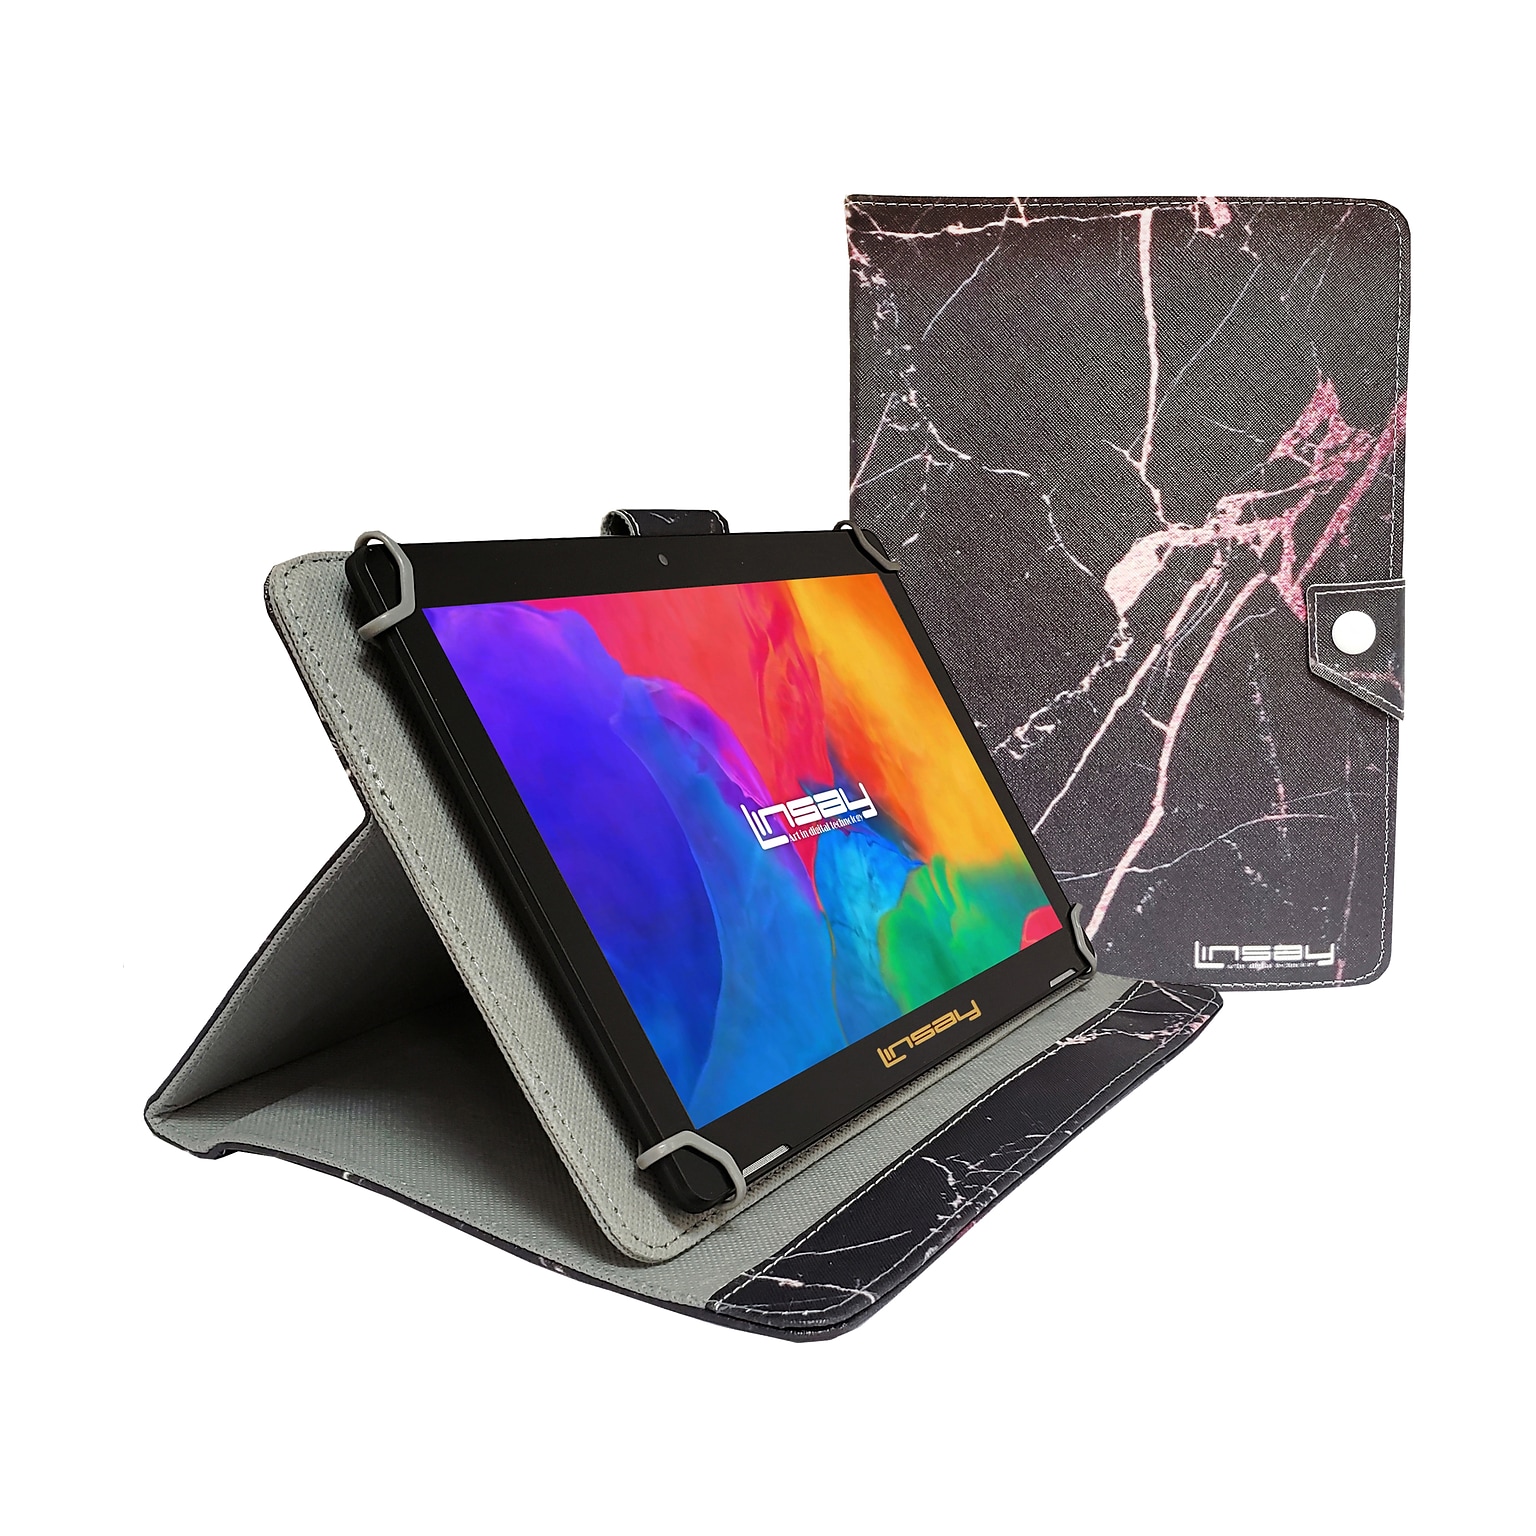 Linsay 10.1 Tablet with Case, WiFi, 2GB RAM, 64GB Storage, Android 13, Black with Black/Pink Marble (F10IPBAPI)